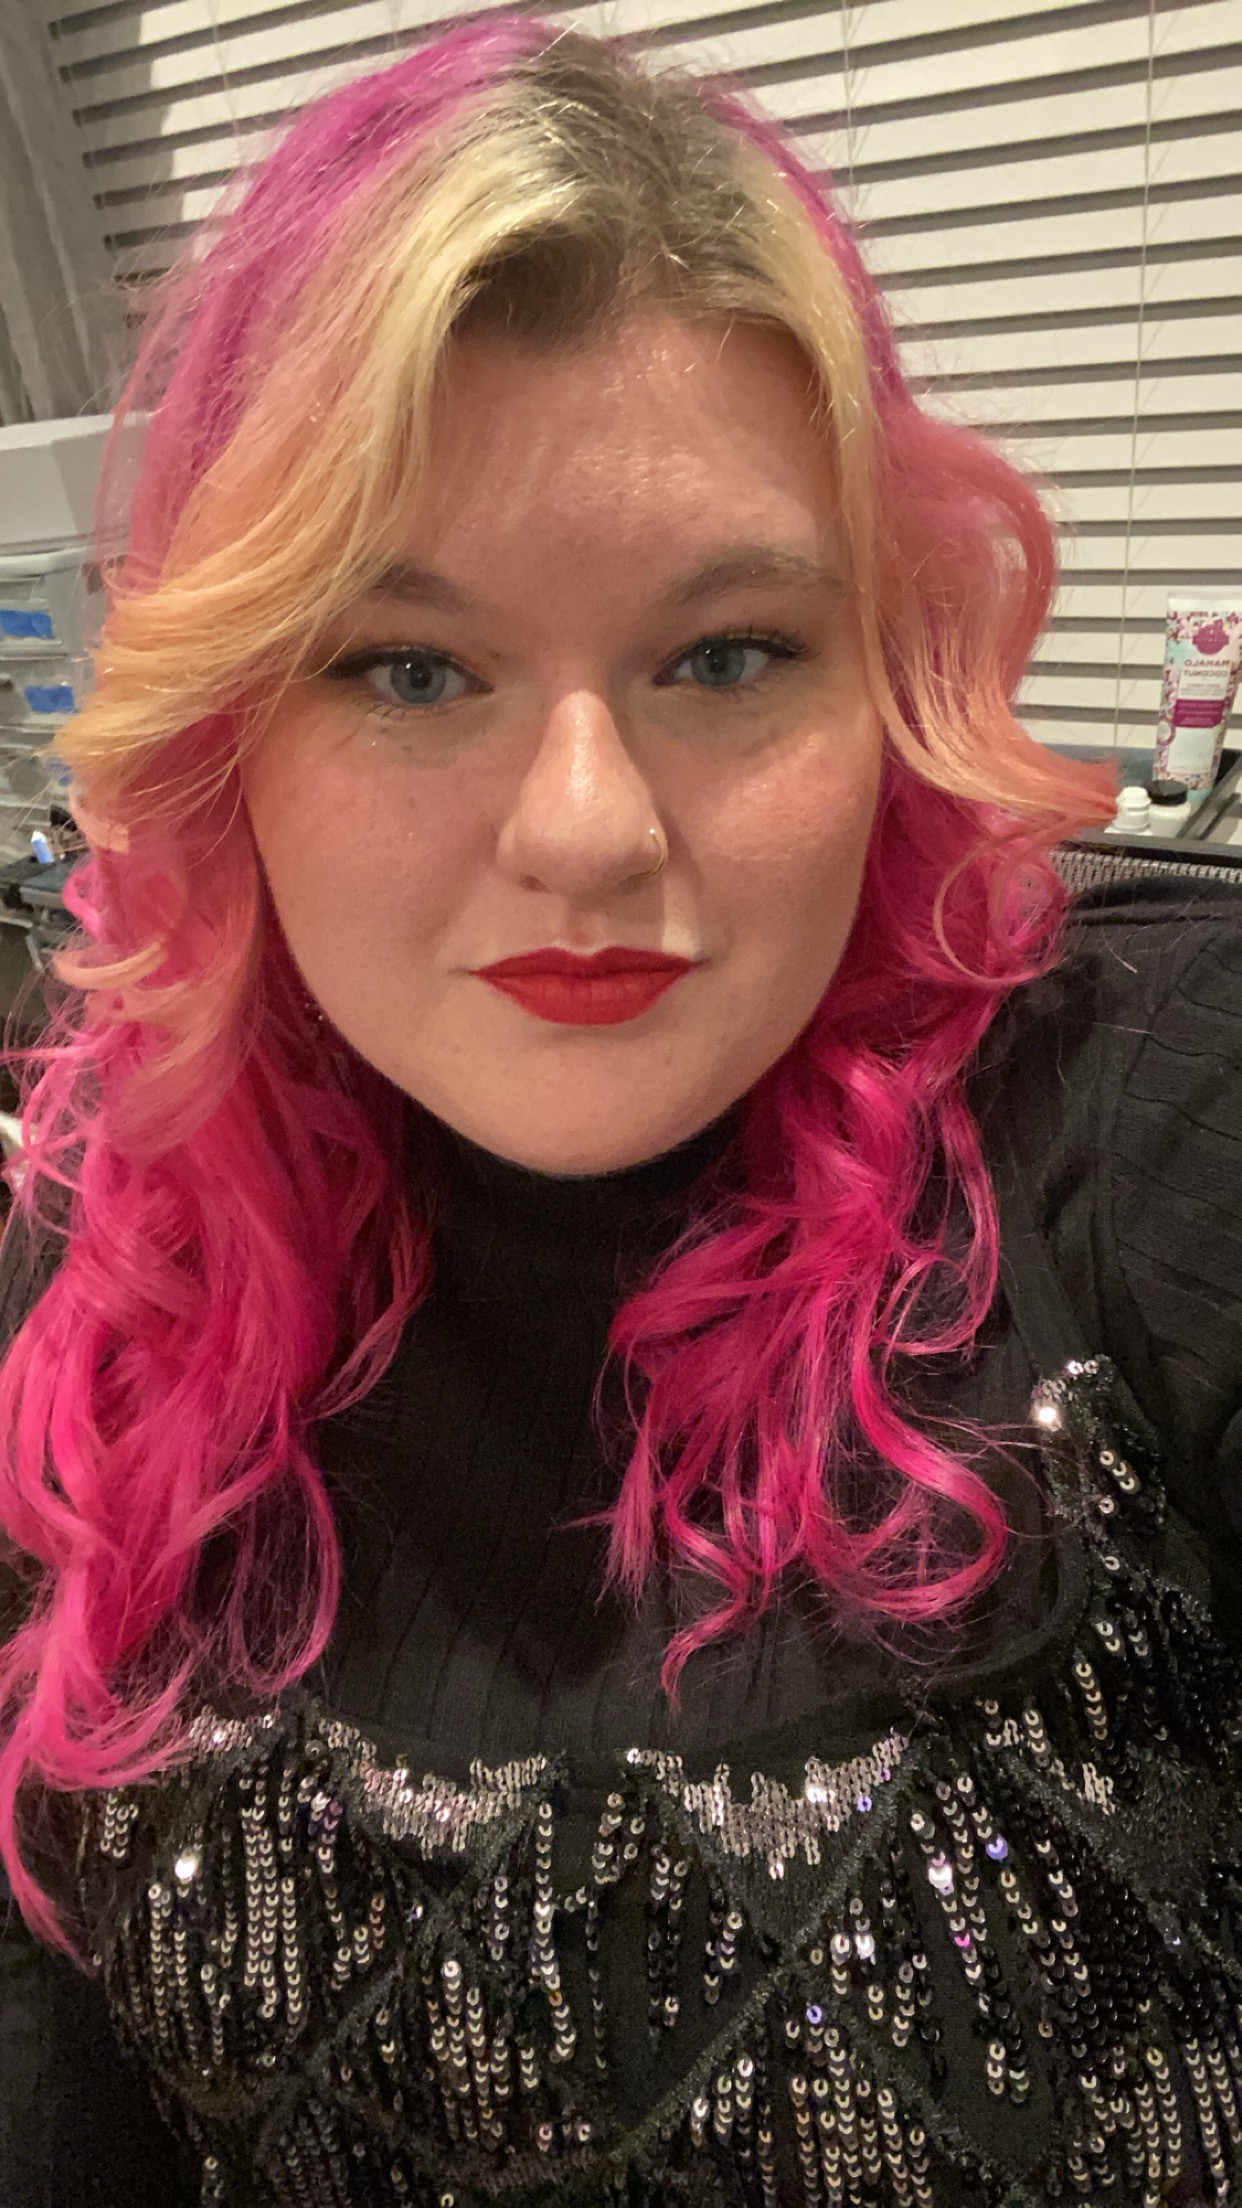 Blonde with pink accents in hair selfie woman